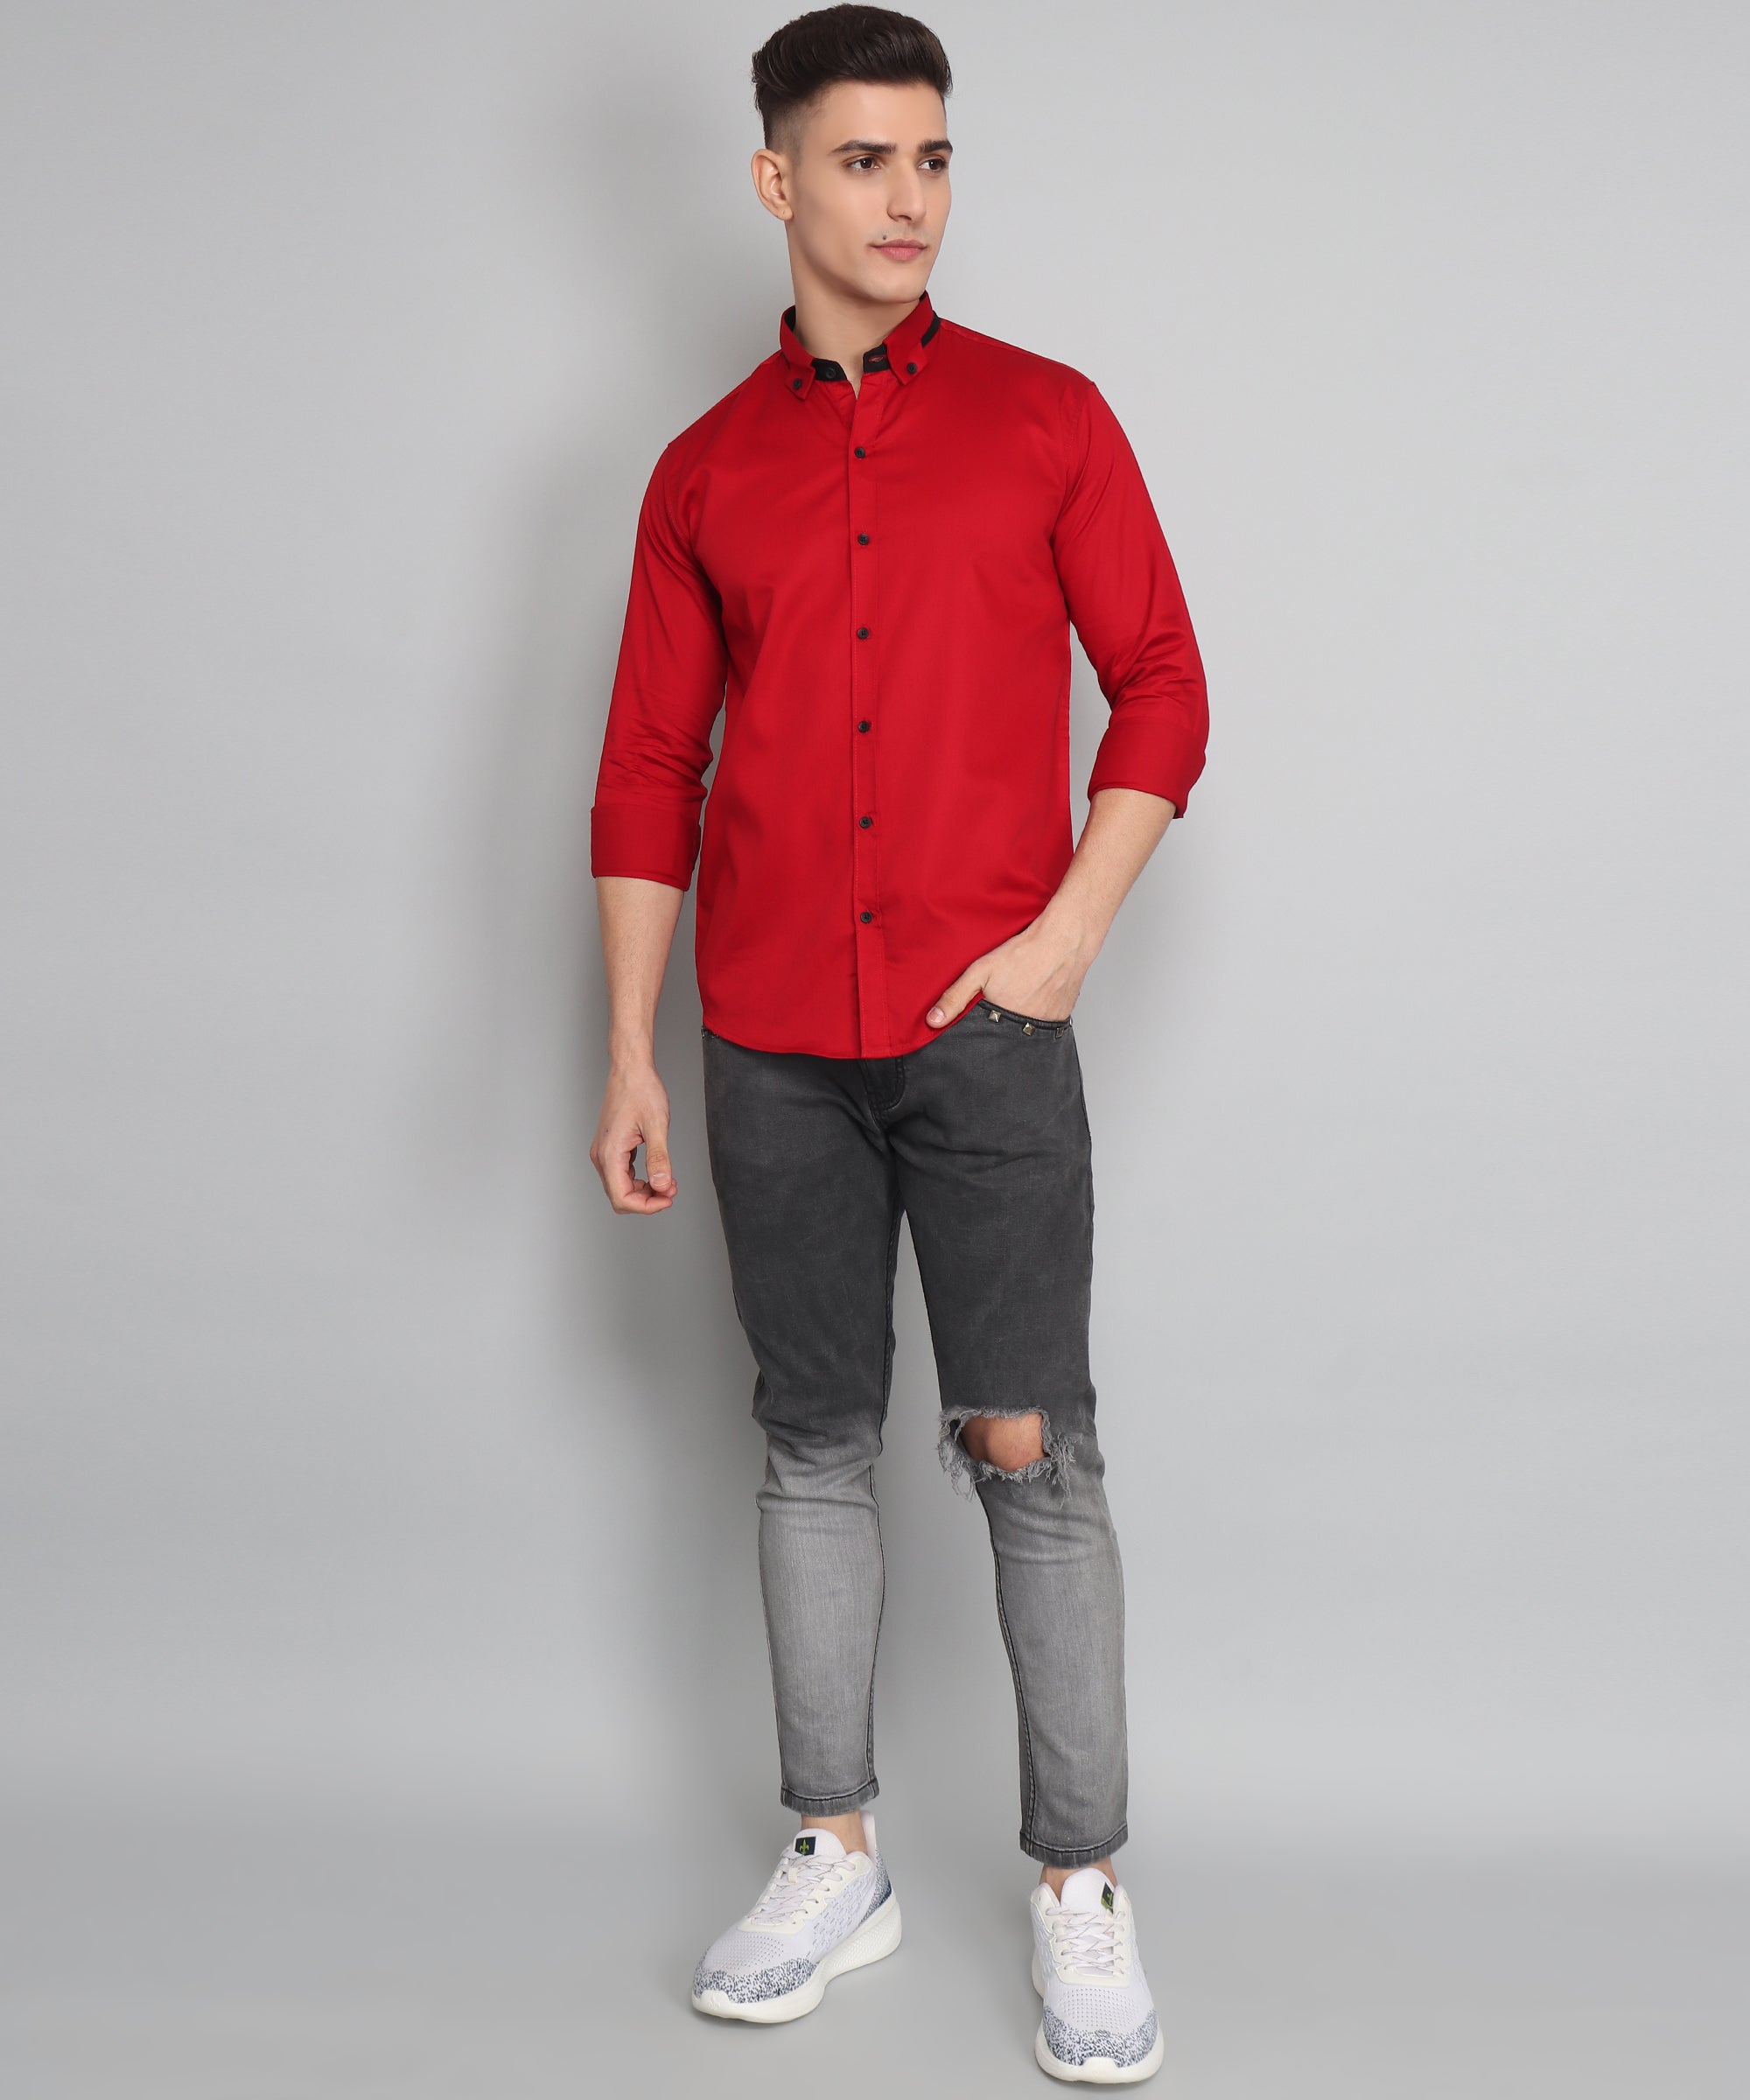 Seersucker Style: Embracing the Breezy Sophistication of Lightweight Puckered Shirts for Men